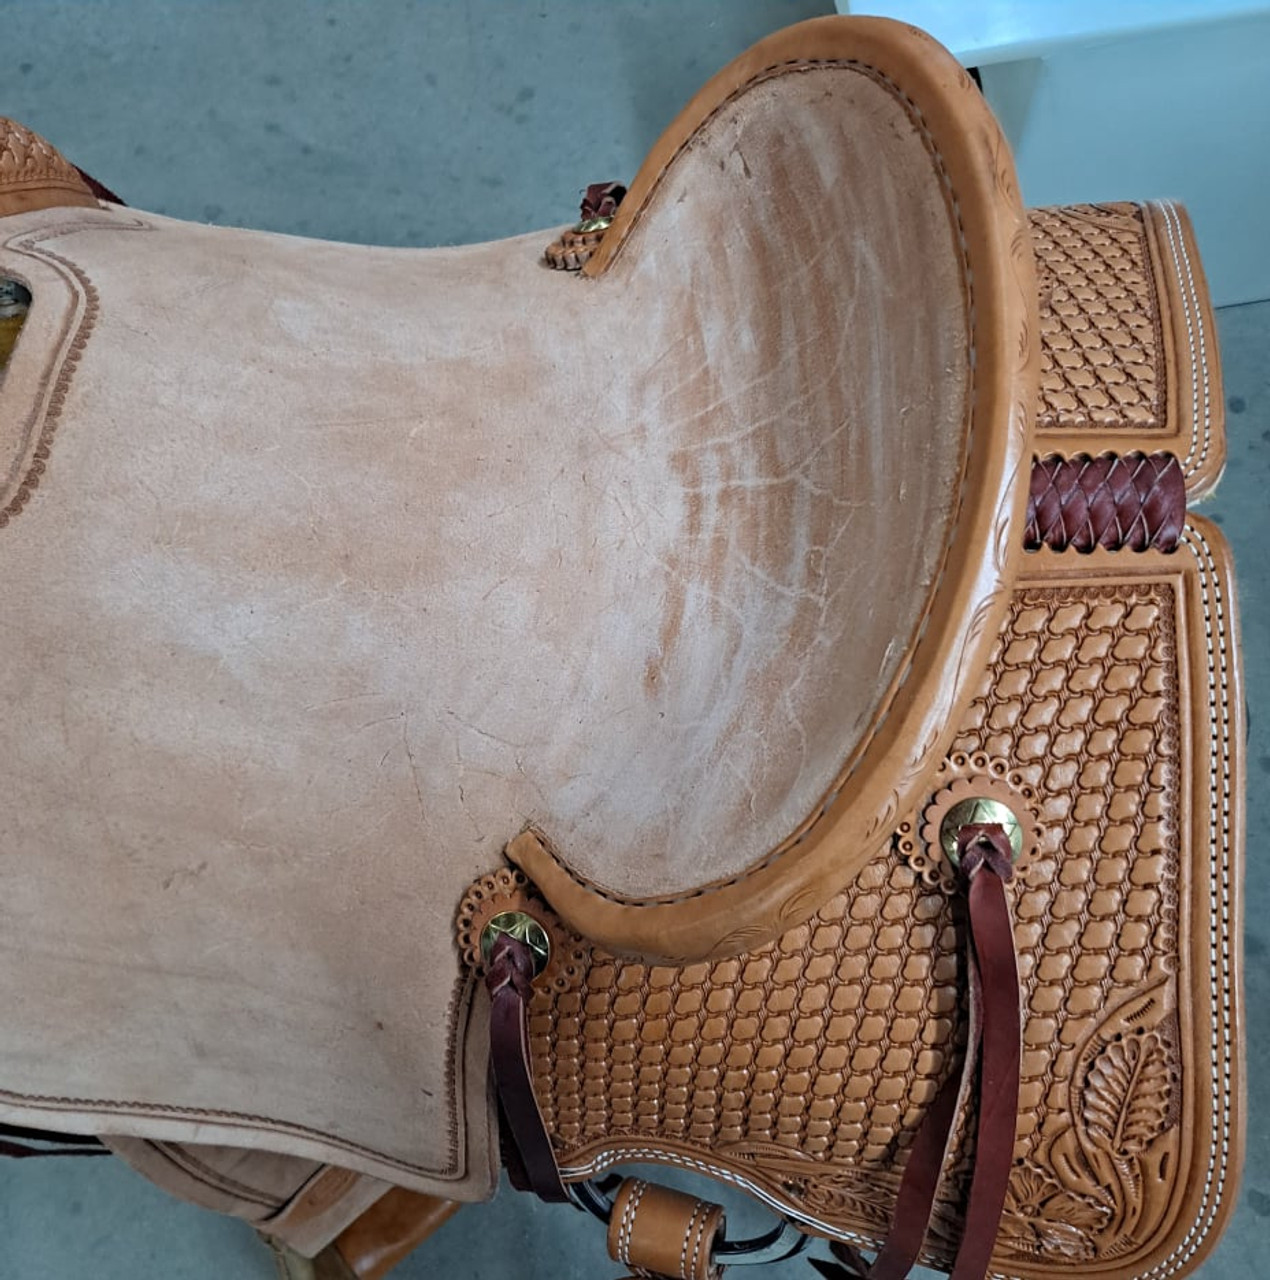 New All Around Saddle by Fort Worth Saddle Co with 15 inch seat. Built on our new proprietary Jplus "hog-bars" roping tree, our new all-around saddle is lightweight, but can be roped from. Limited lifetime warranty on tree. Constructed of Hermann Oak leather. Hand tooled. Secure pencil roll seat. Drop-rigged for added stability. Gullet size is 7.25 inch, weight is 32lbs, and skirt is 26.5 inch. Made in USA. Limited lifetime warranty.

S1397